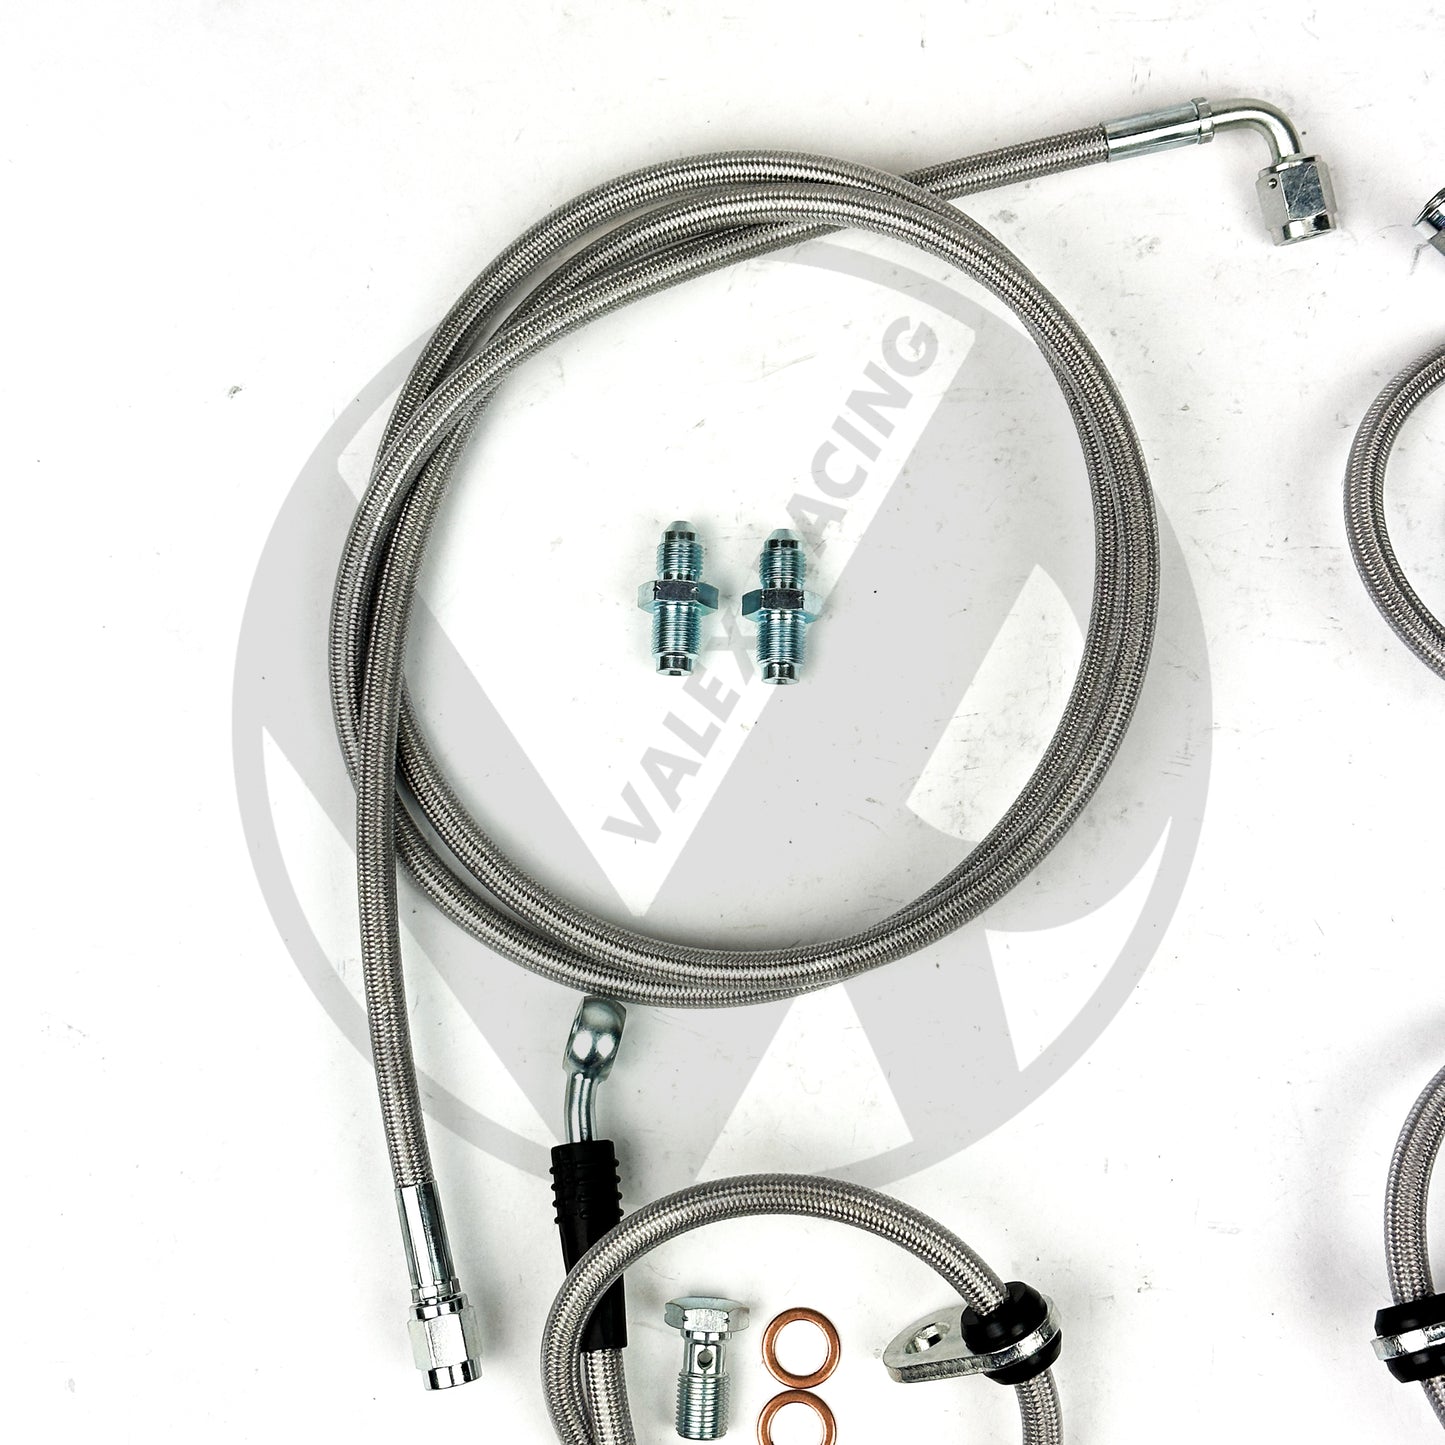 Complete Stainless Front Brake Line Replacement Kit 88-91 Honda Civic / CRX EF